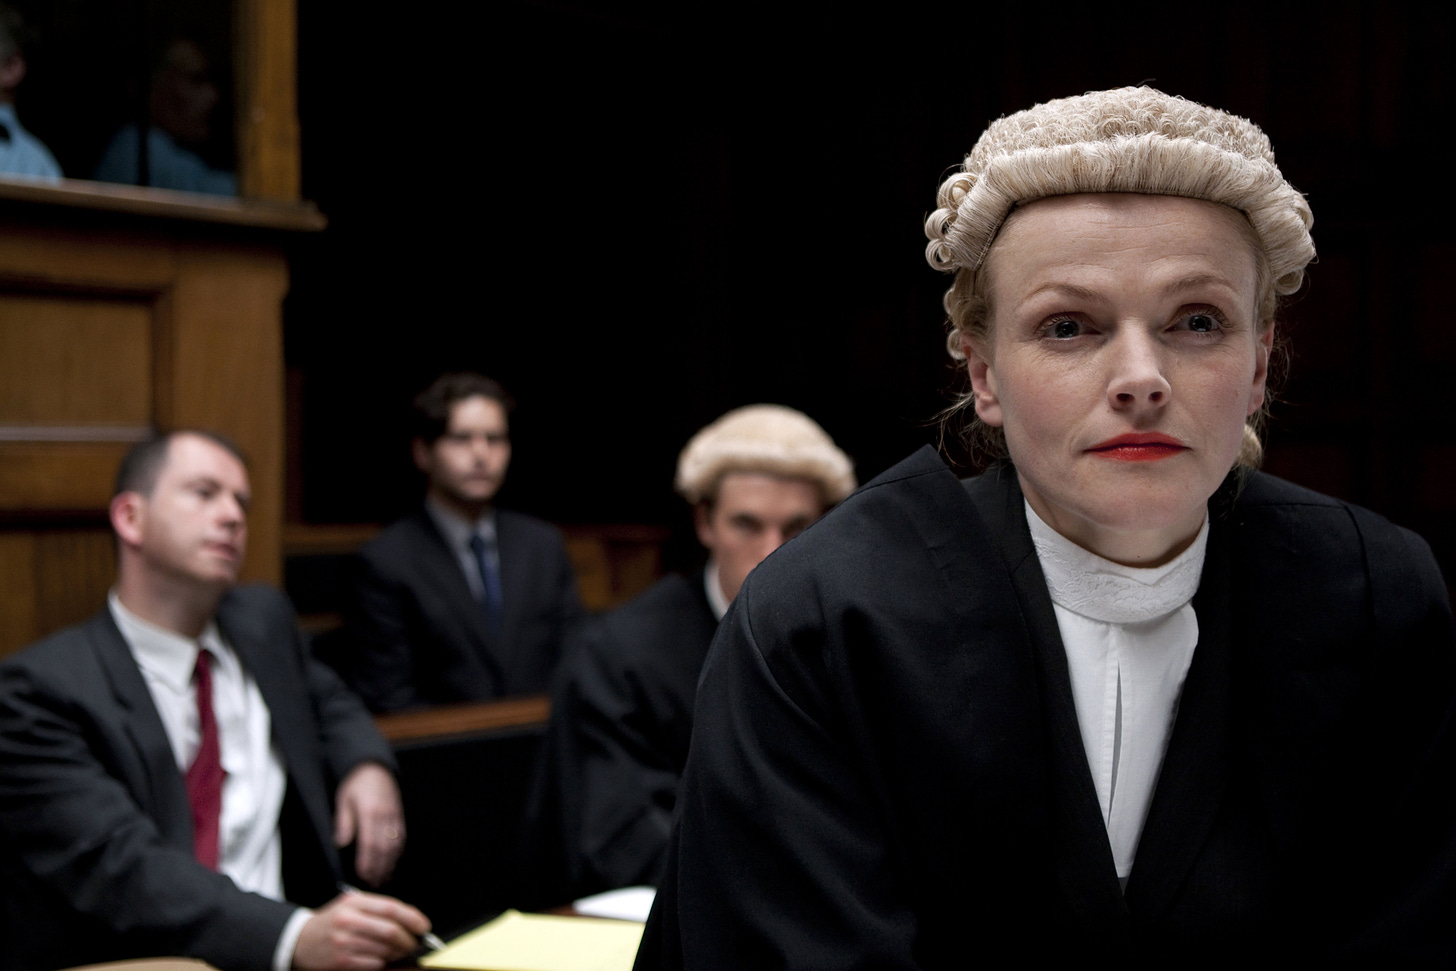 Courtroom Drama Silk Headed to Masterpiece This Summer | Telly Visions